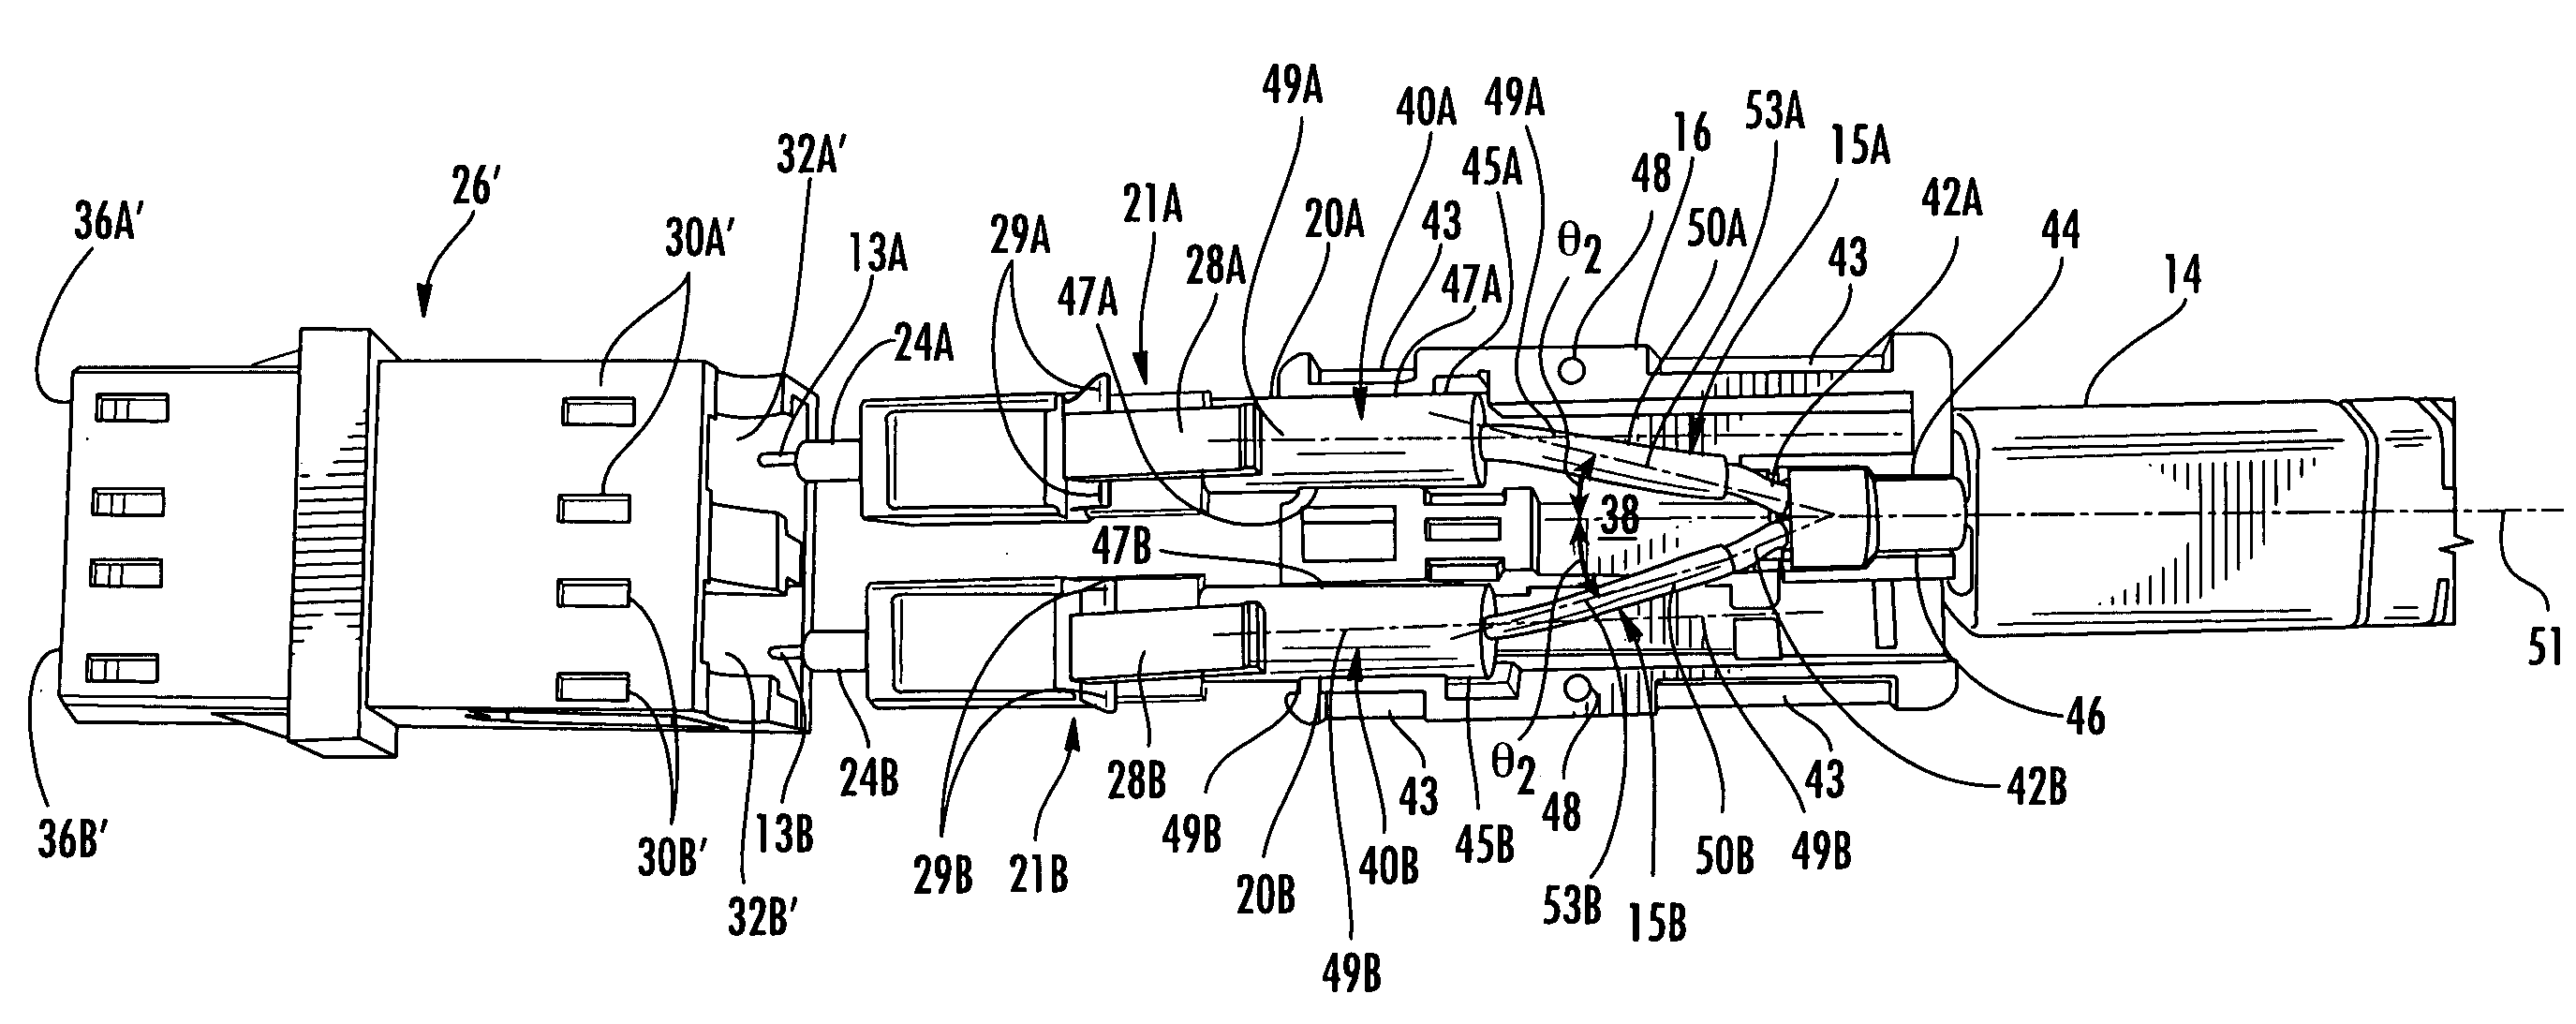 Fiber optic connector assembly employing fiber movement support and method of assembly